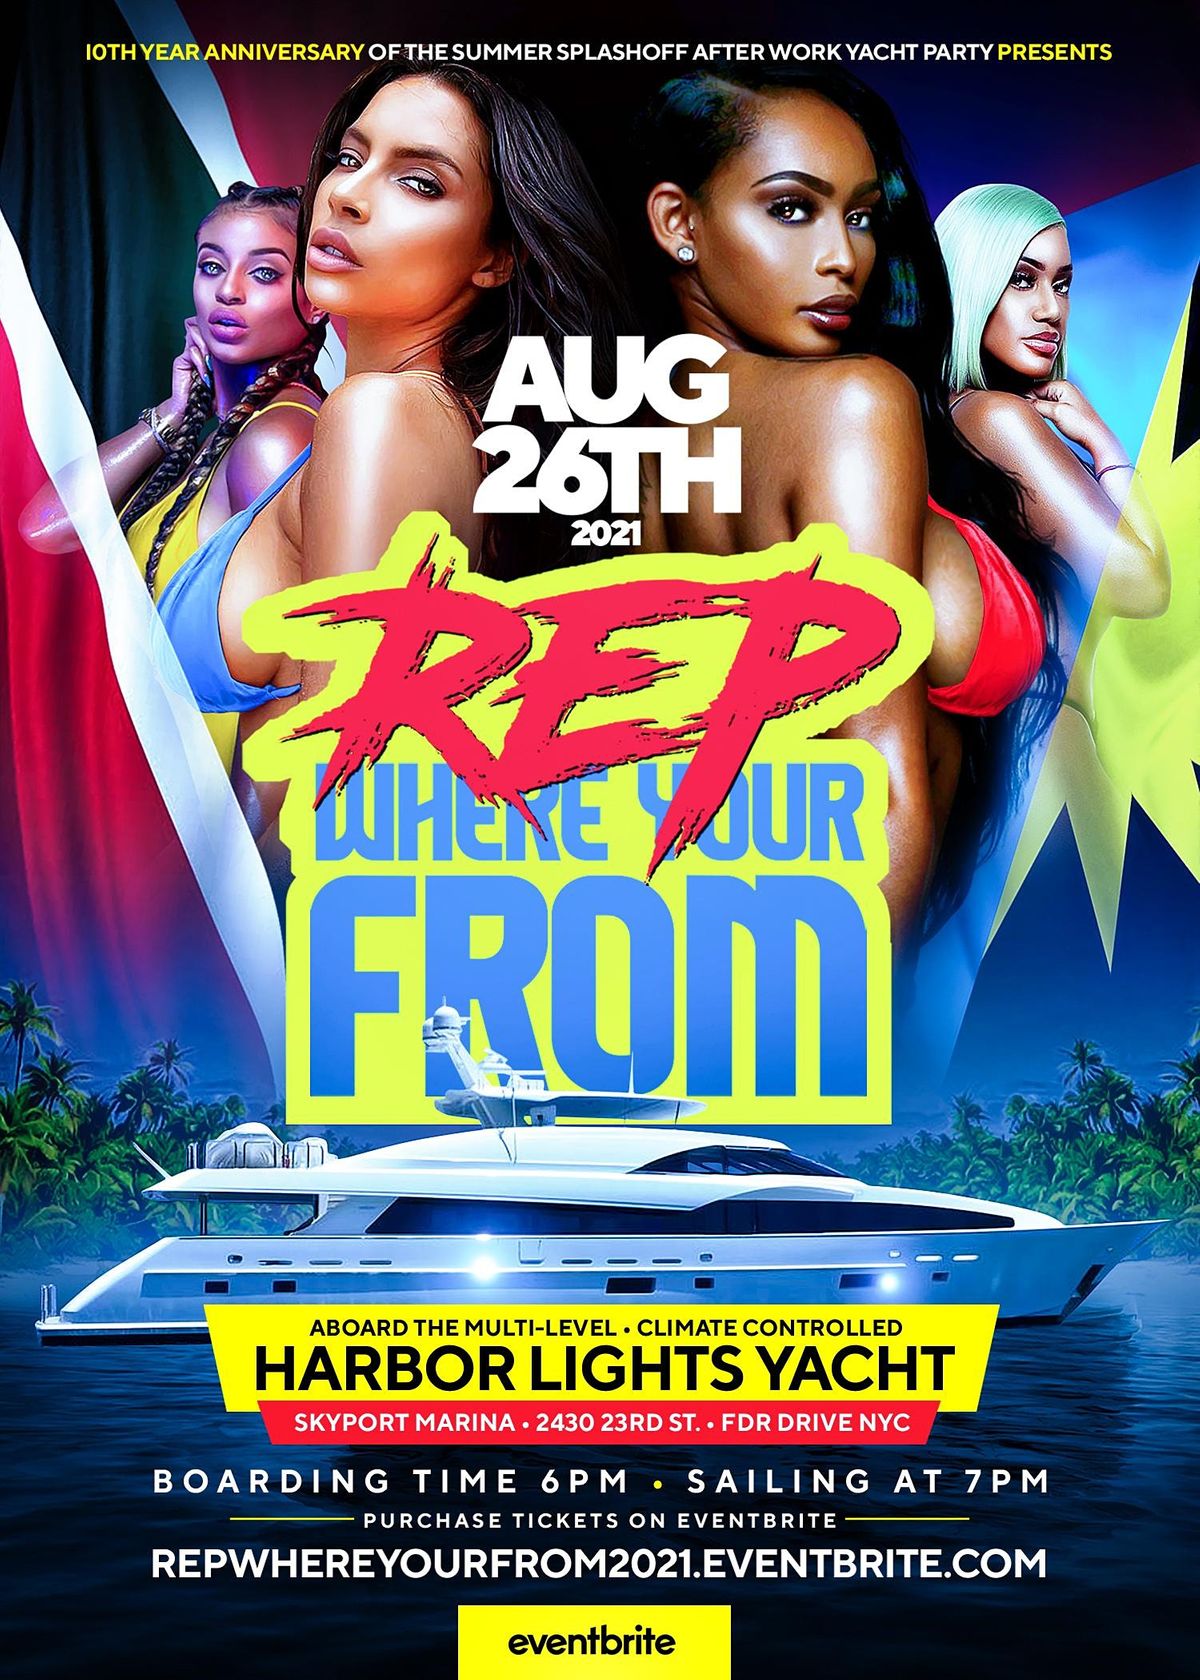 AUG 26th REP WHERE UR FROM